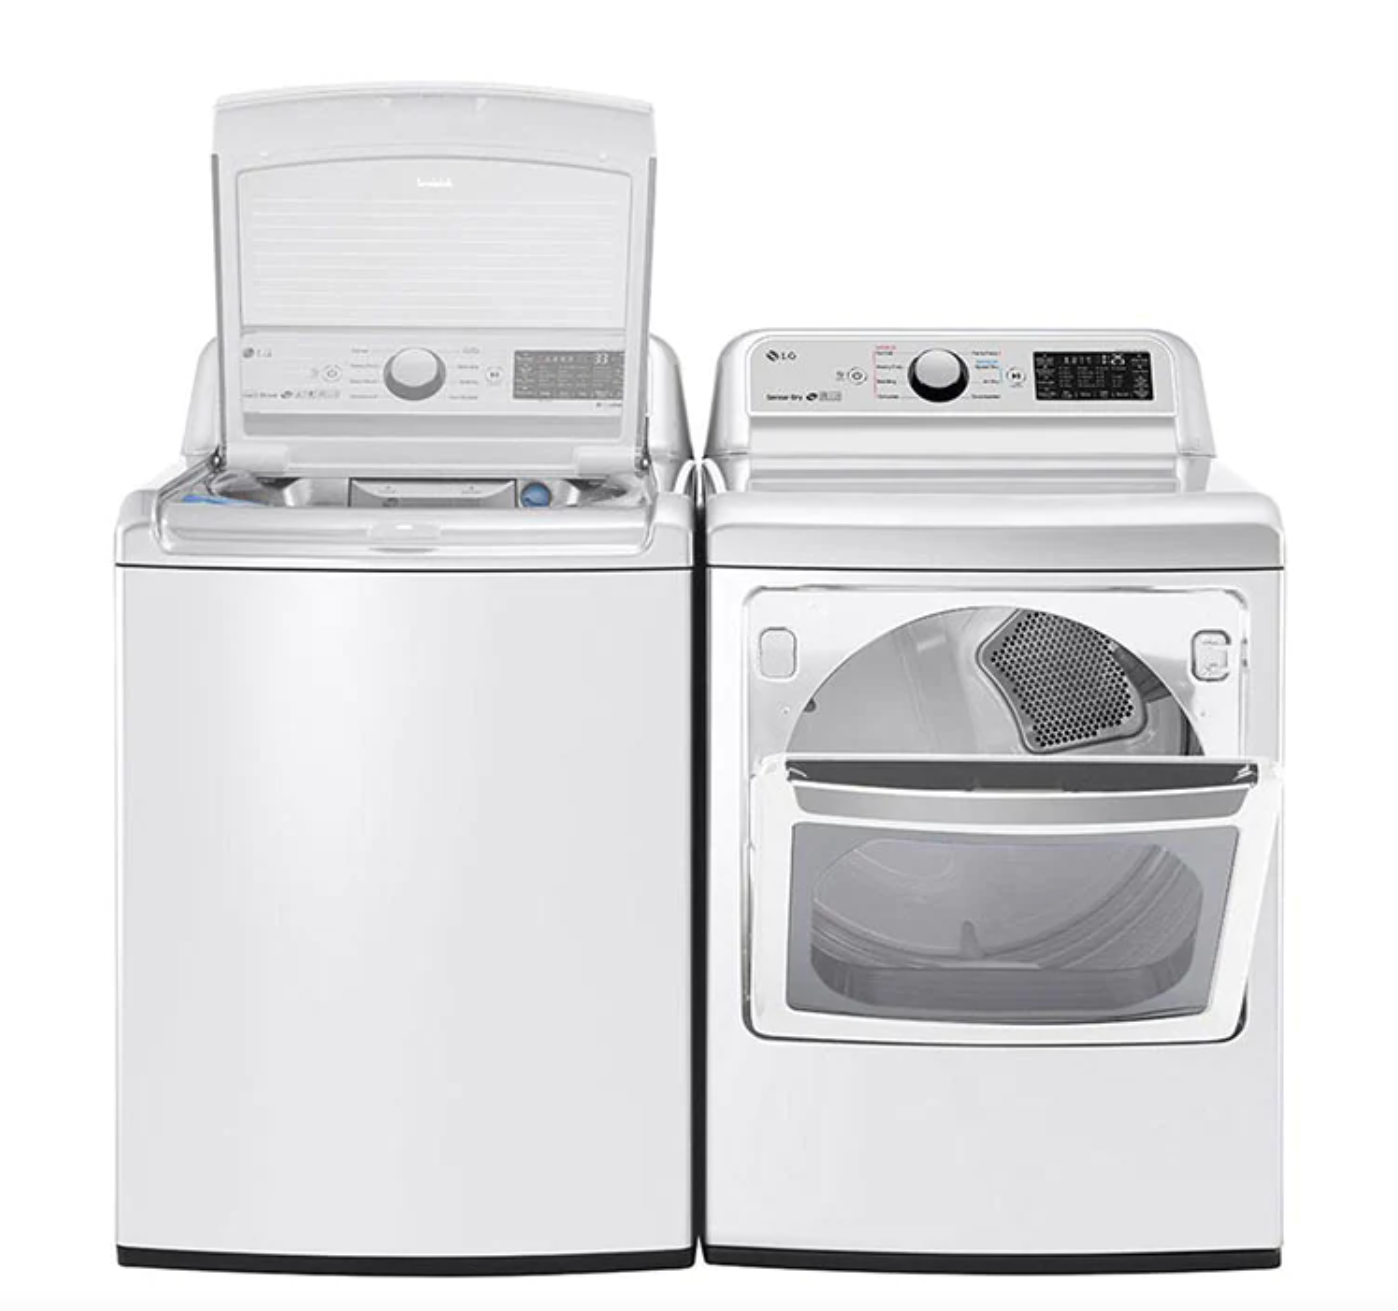 LG Smart Top Load Washer with 6Motion Technology and Electric Dryer with Sensor Dry